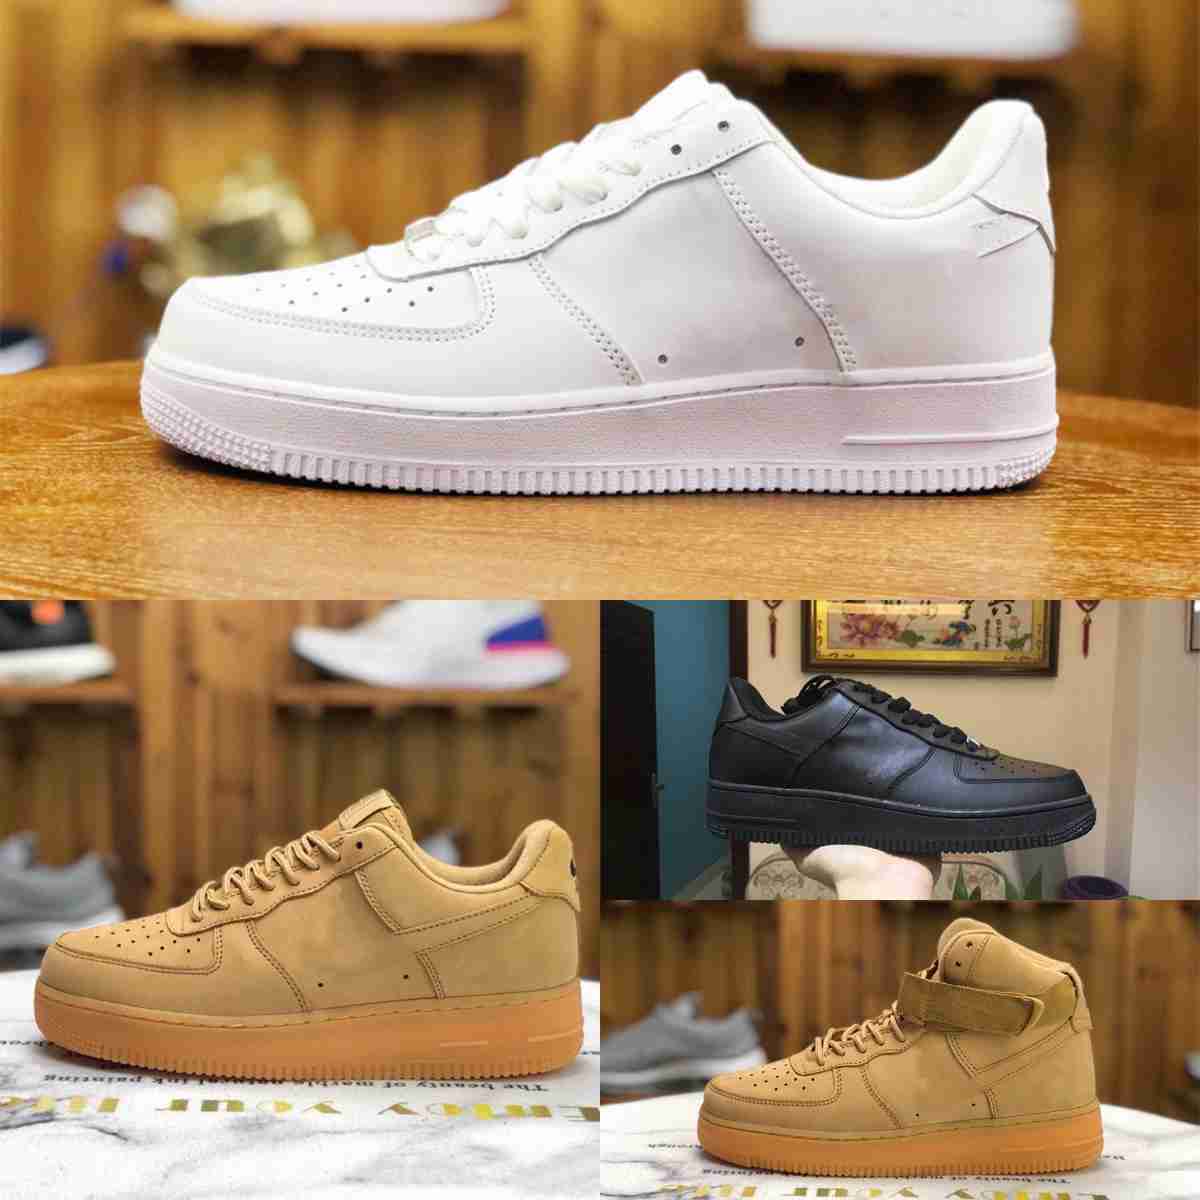 

Designer 2023 New FoRcEs Outdoor Men Low Skateboard Shoes Knit Euro Airs High Women All White Black Wheat Running Discount One Unisex Classic 1 07 Sports Sneakers S2, Please contact us